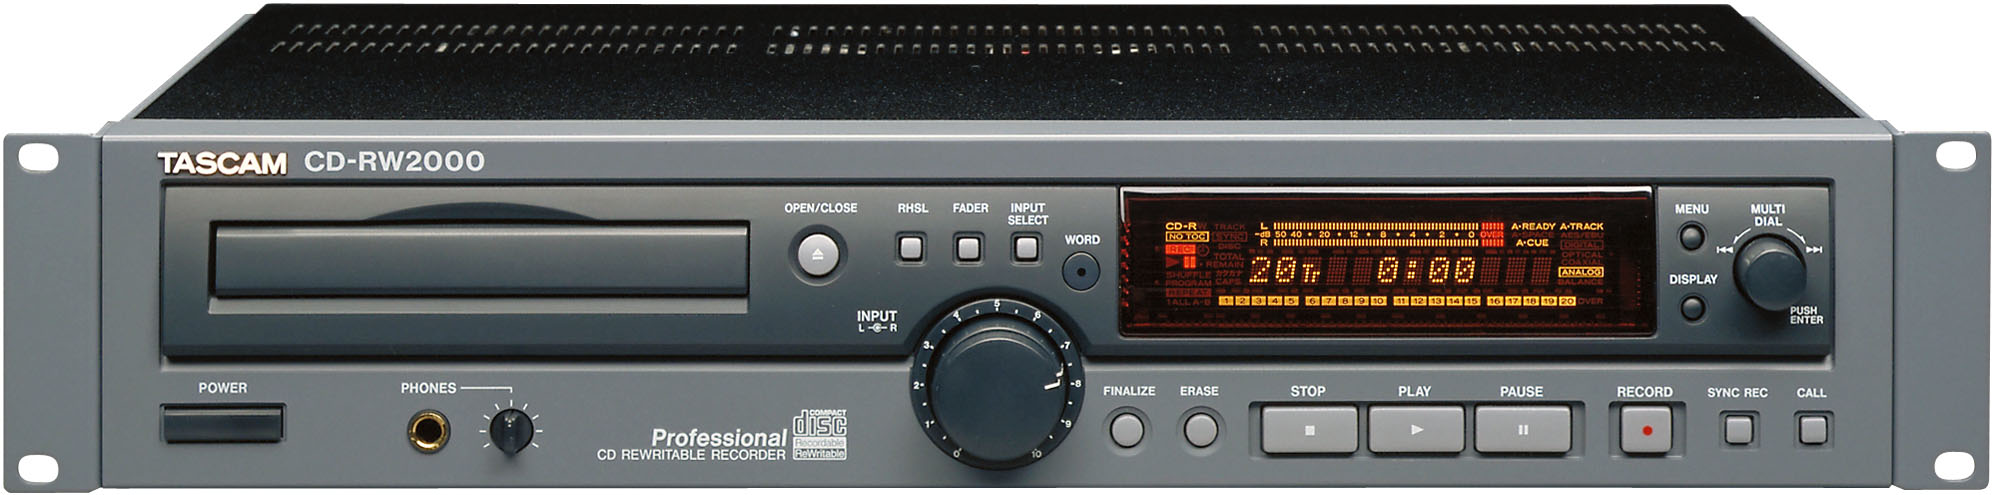 Tascam us 1641 drivers download